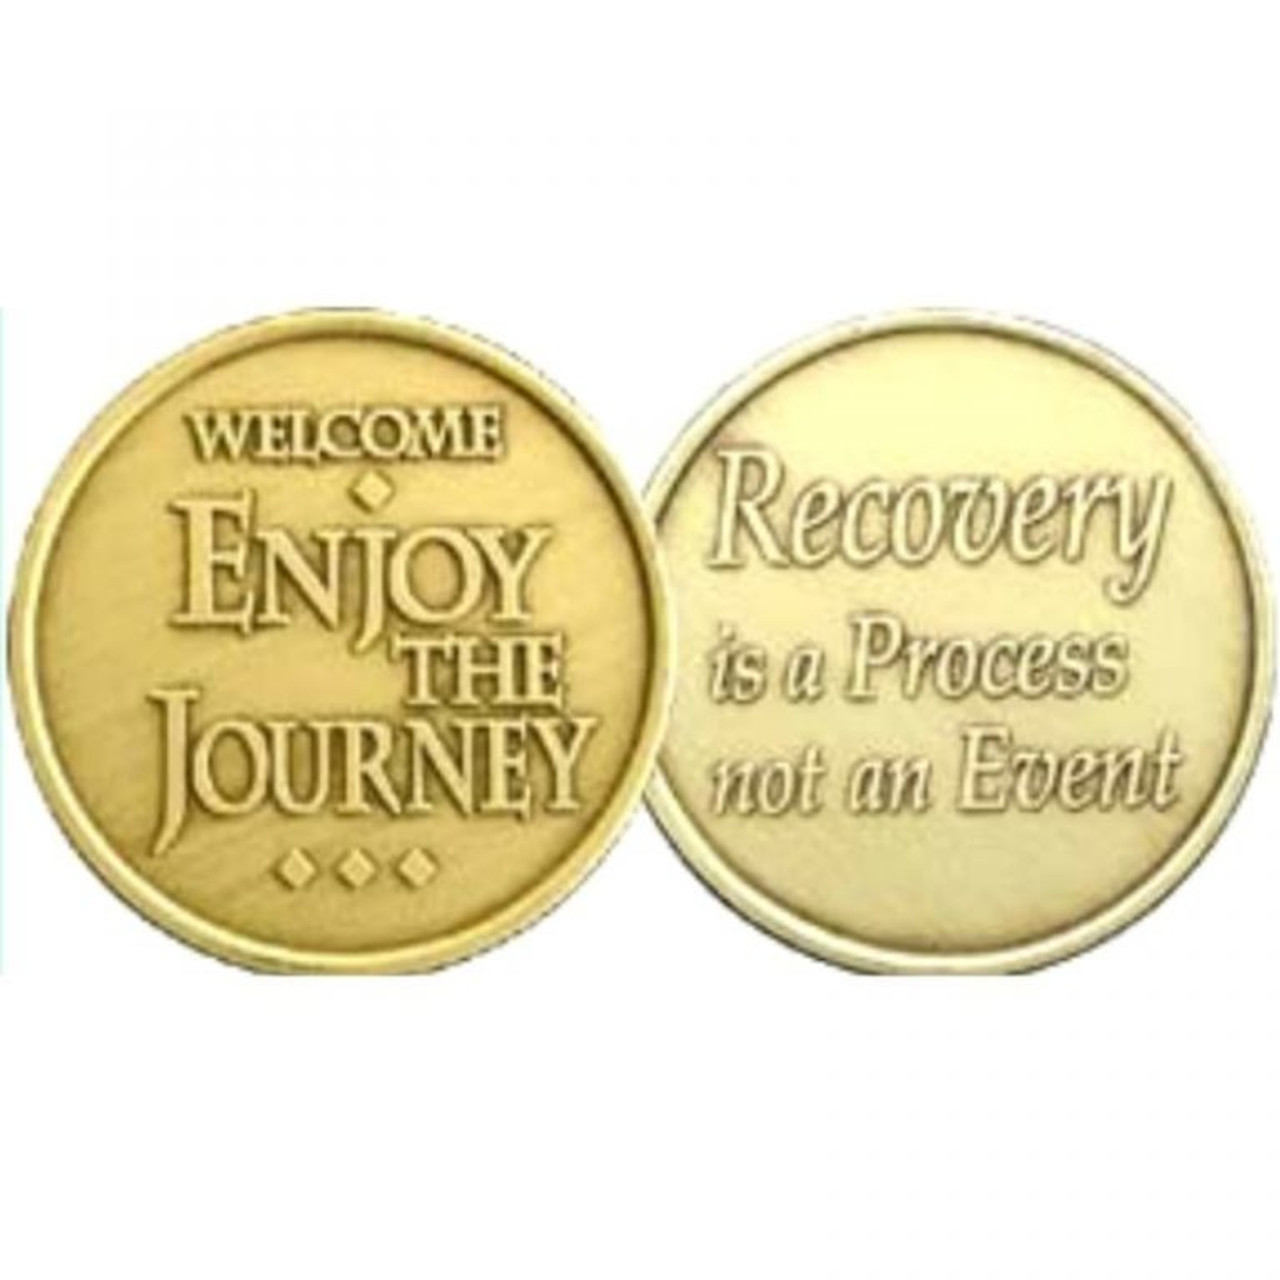 Welcome Enjoy The Journey Welcome/ Recovery Process Bronze Recovery  Specialty Medallion Coin